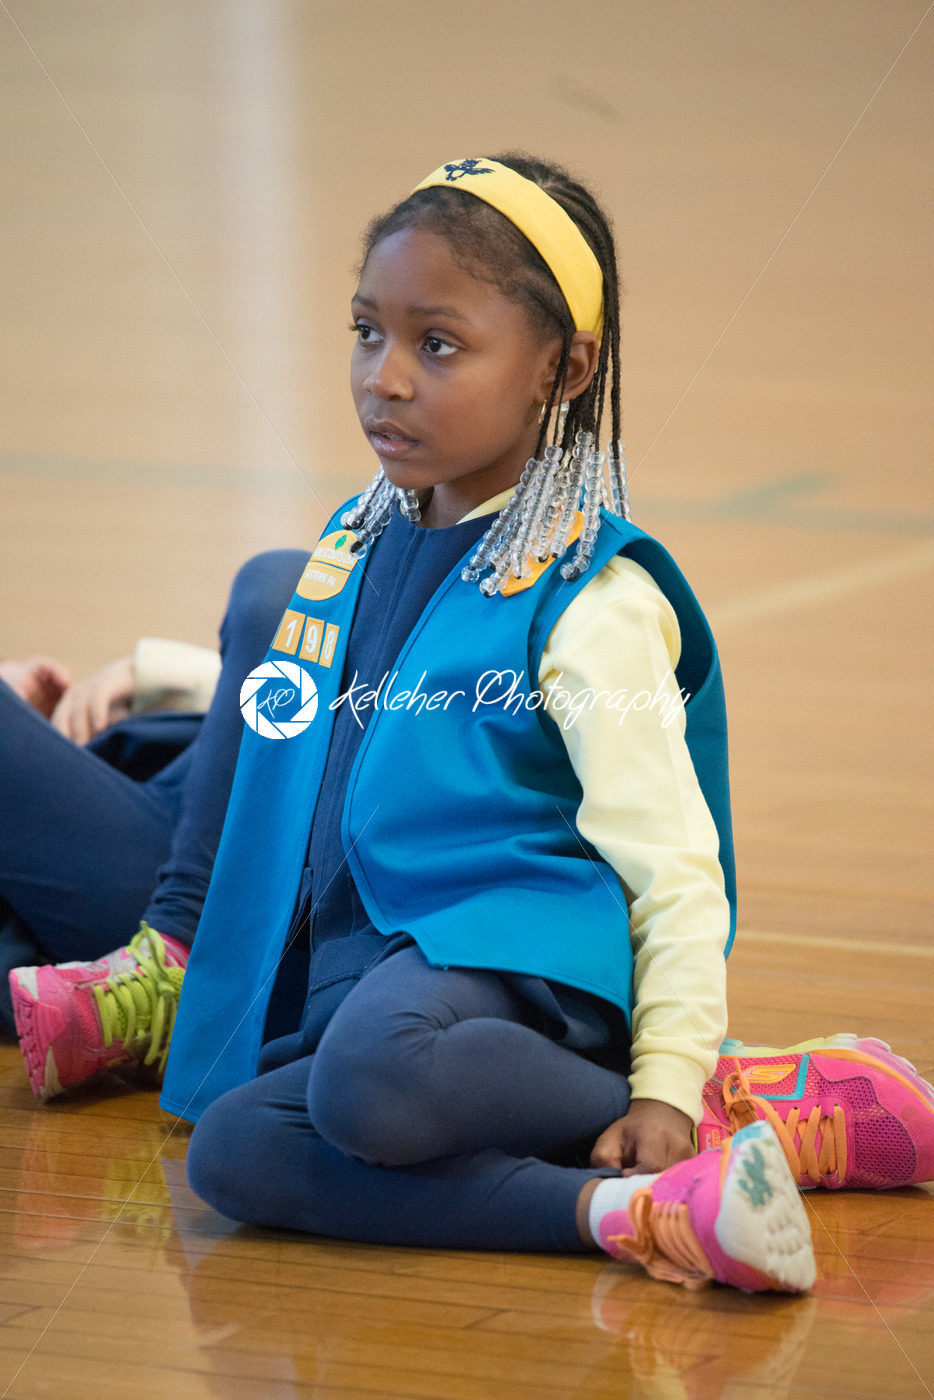 ROSEMONT, PA – OCTOBER 19: Agnes Irwin Daisy Scout Troop 5198 Investiture Ceremony on October 19, 2015 - Kelleher Photography Store